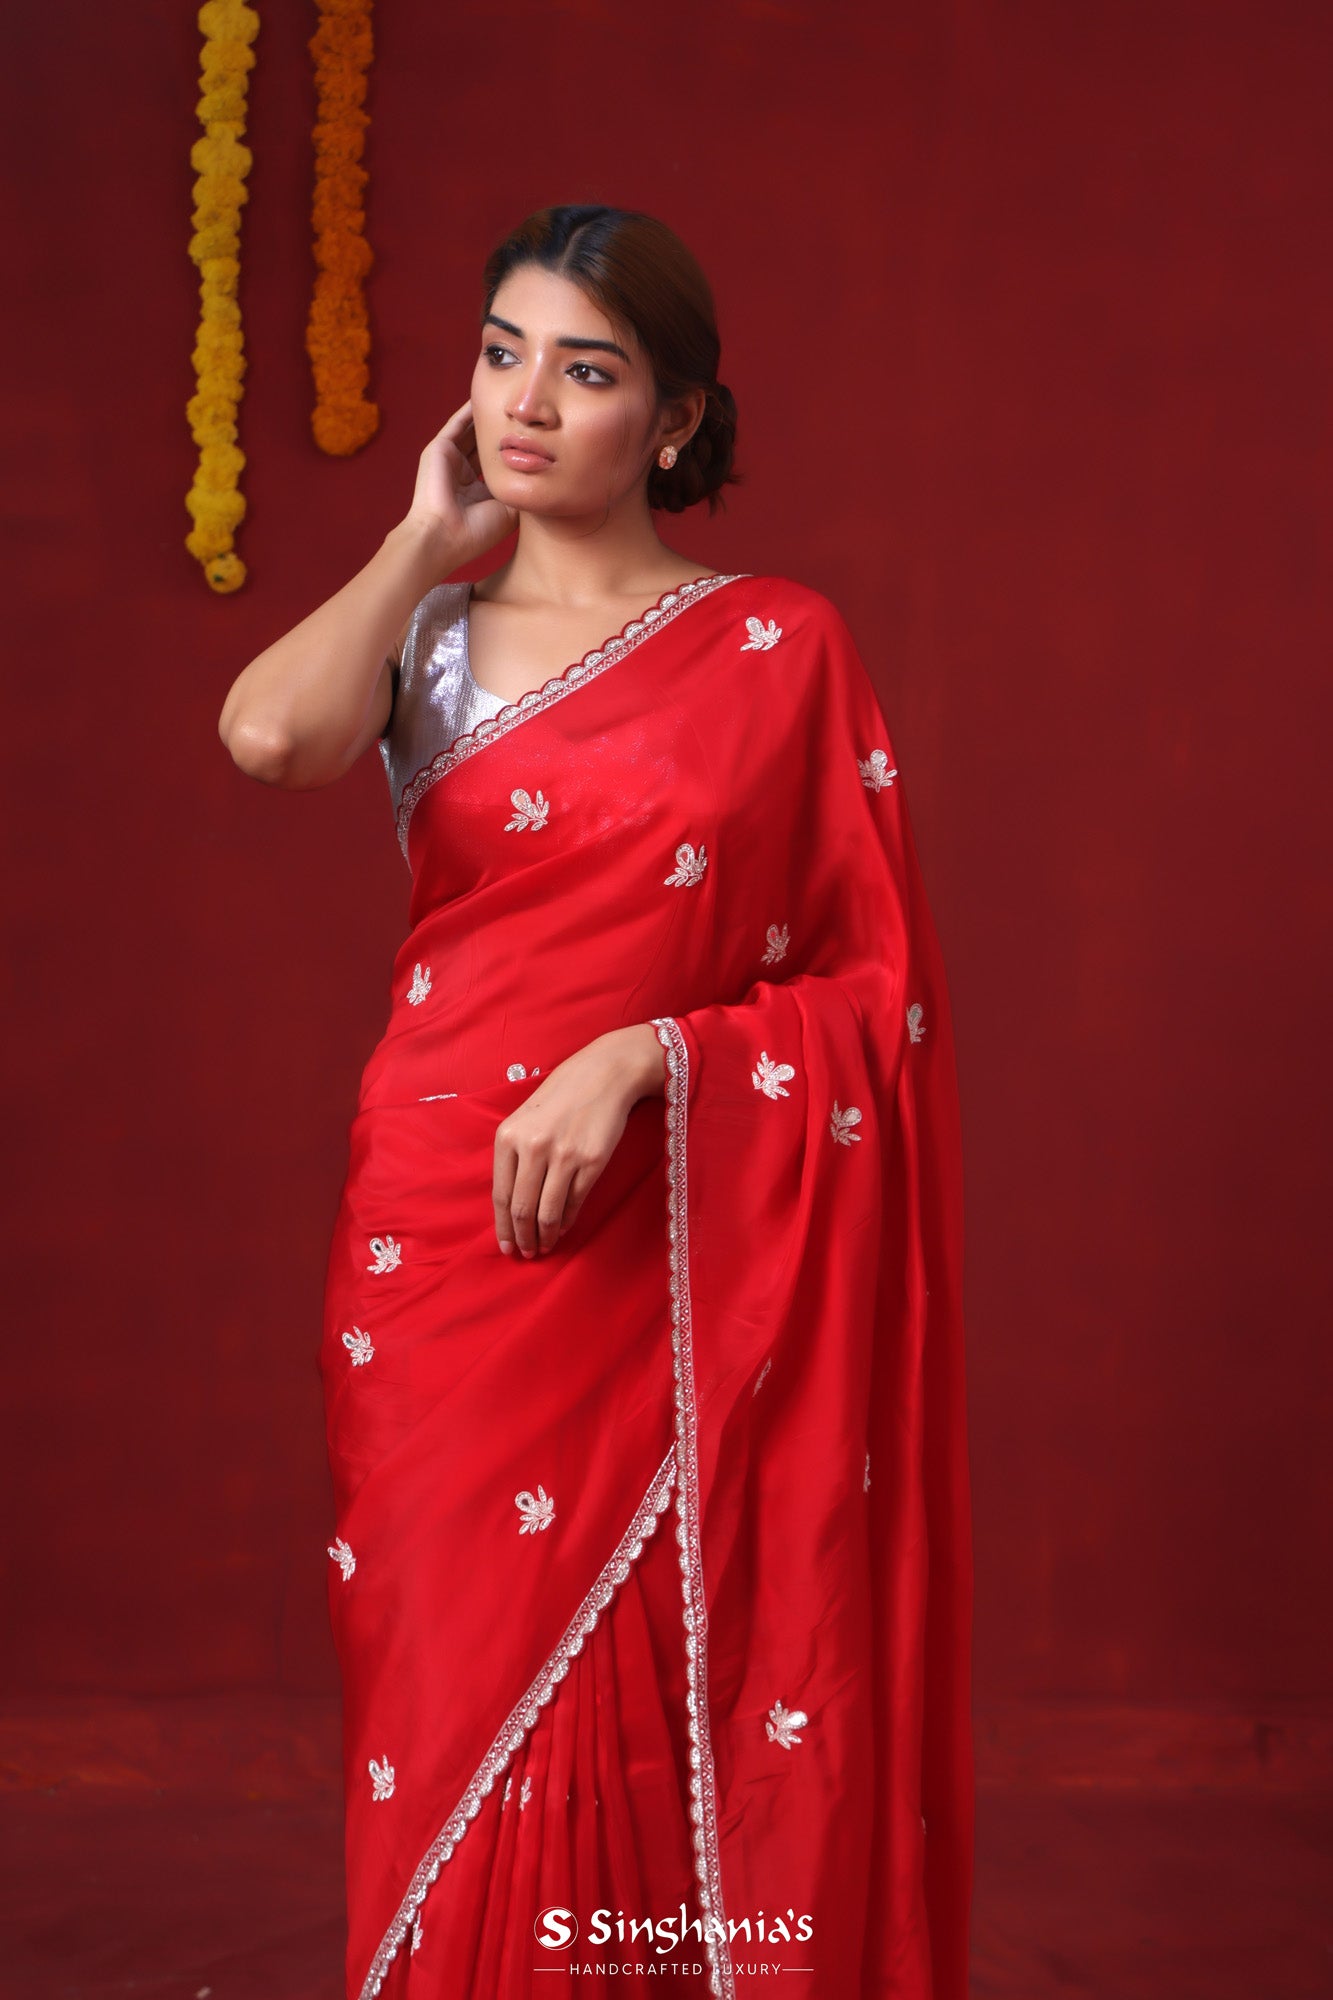 Prismatic Red Modal Satin Saree With Hand Embroidery